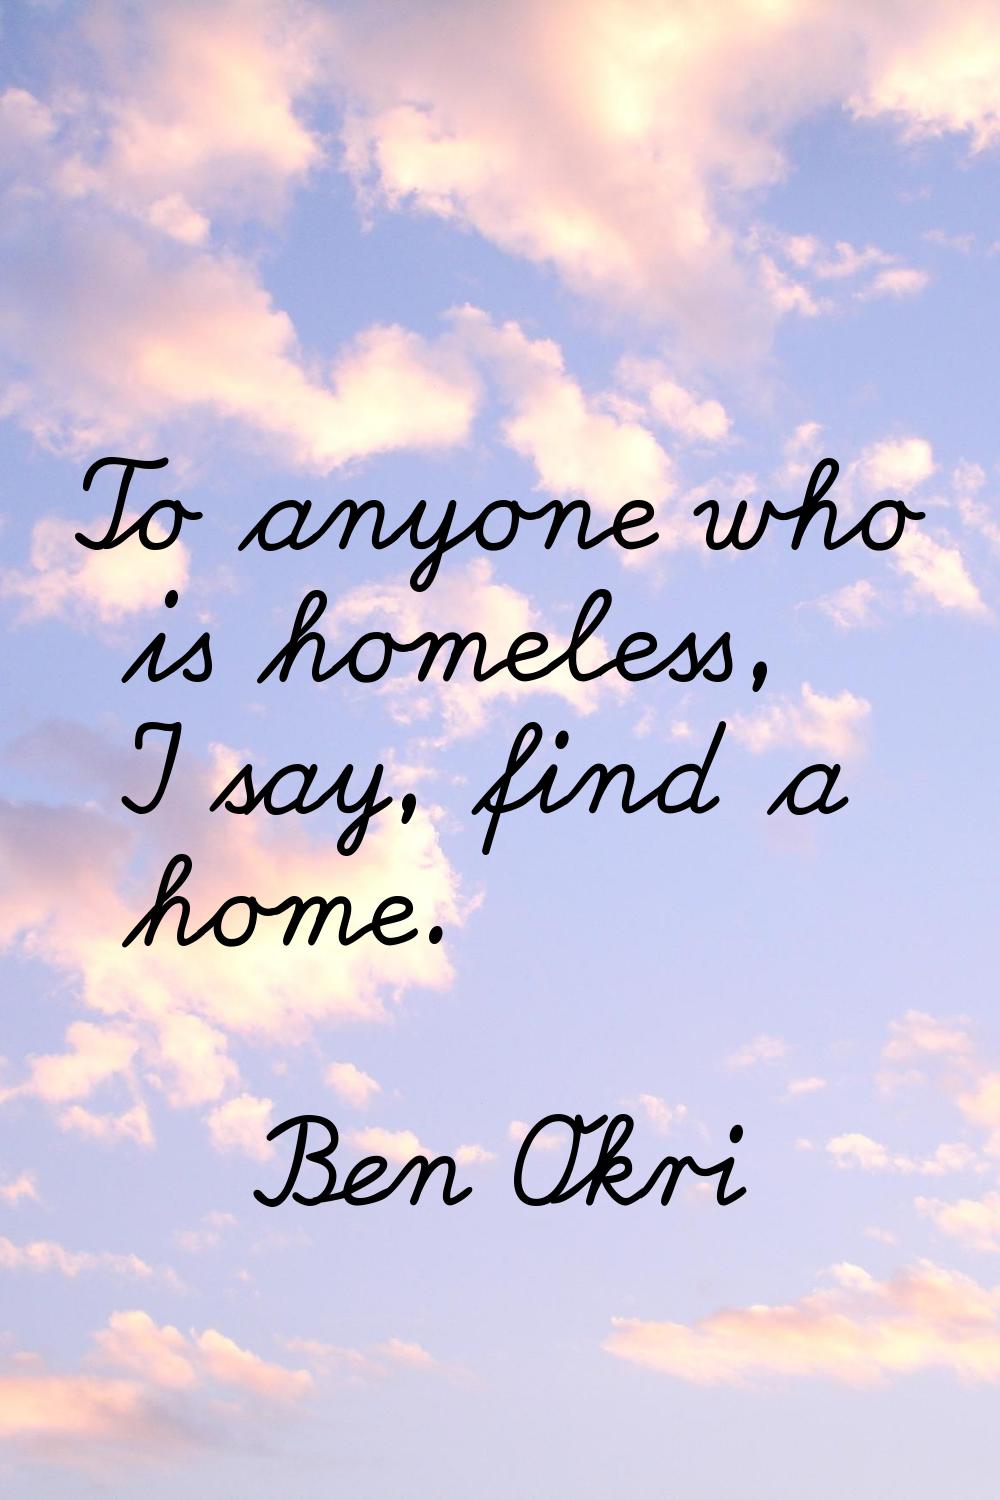 To anyone who is homeless, I say, find a home.